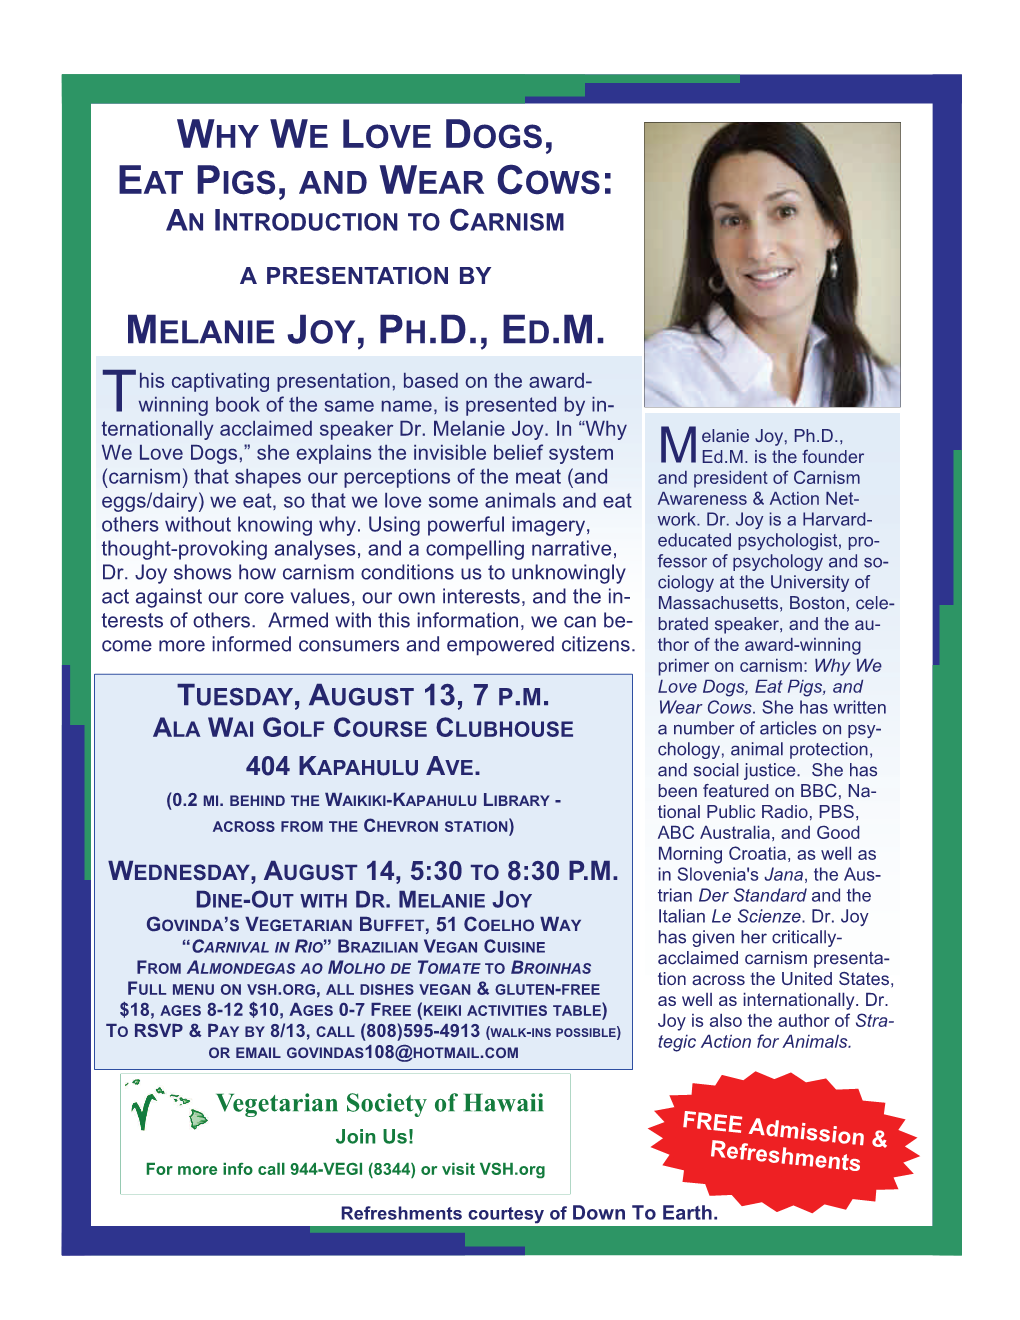 Why We Love Dogs, Eat Pigs, and Wear Cows: Melanie Joy, Ph.D., Ed.M